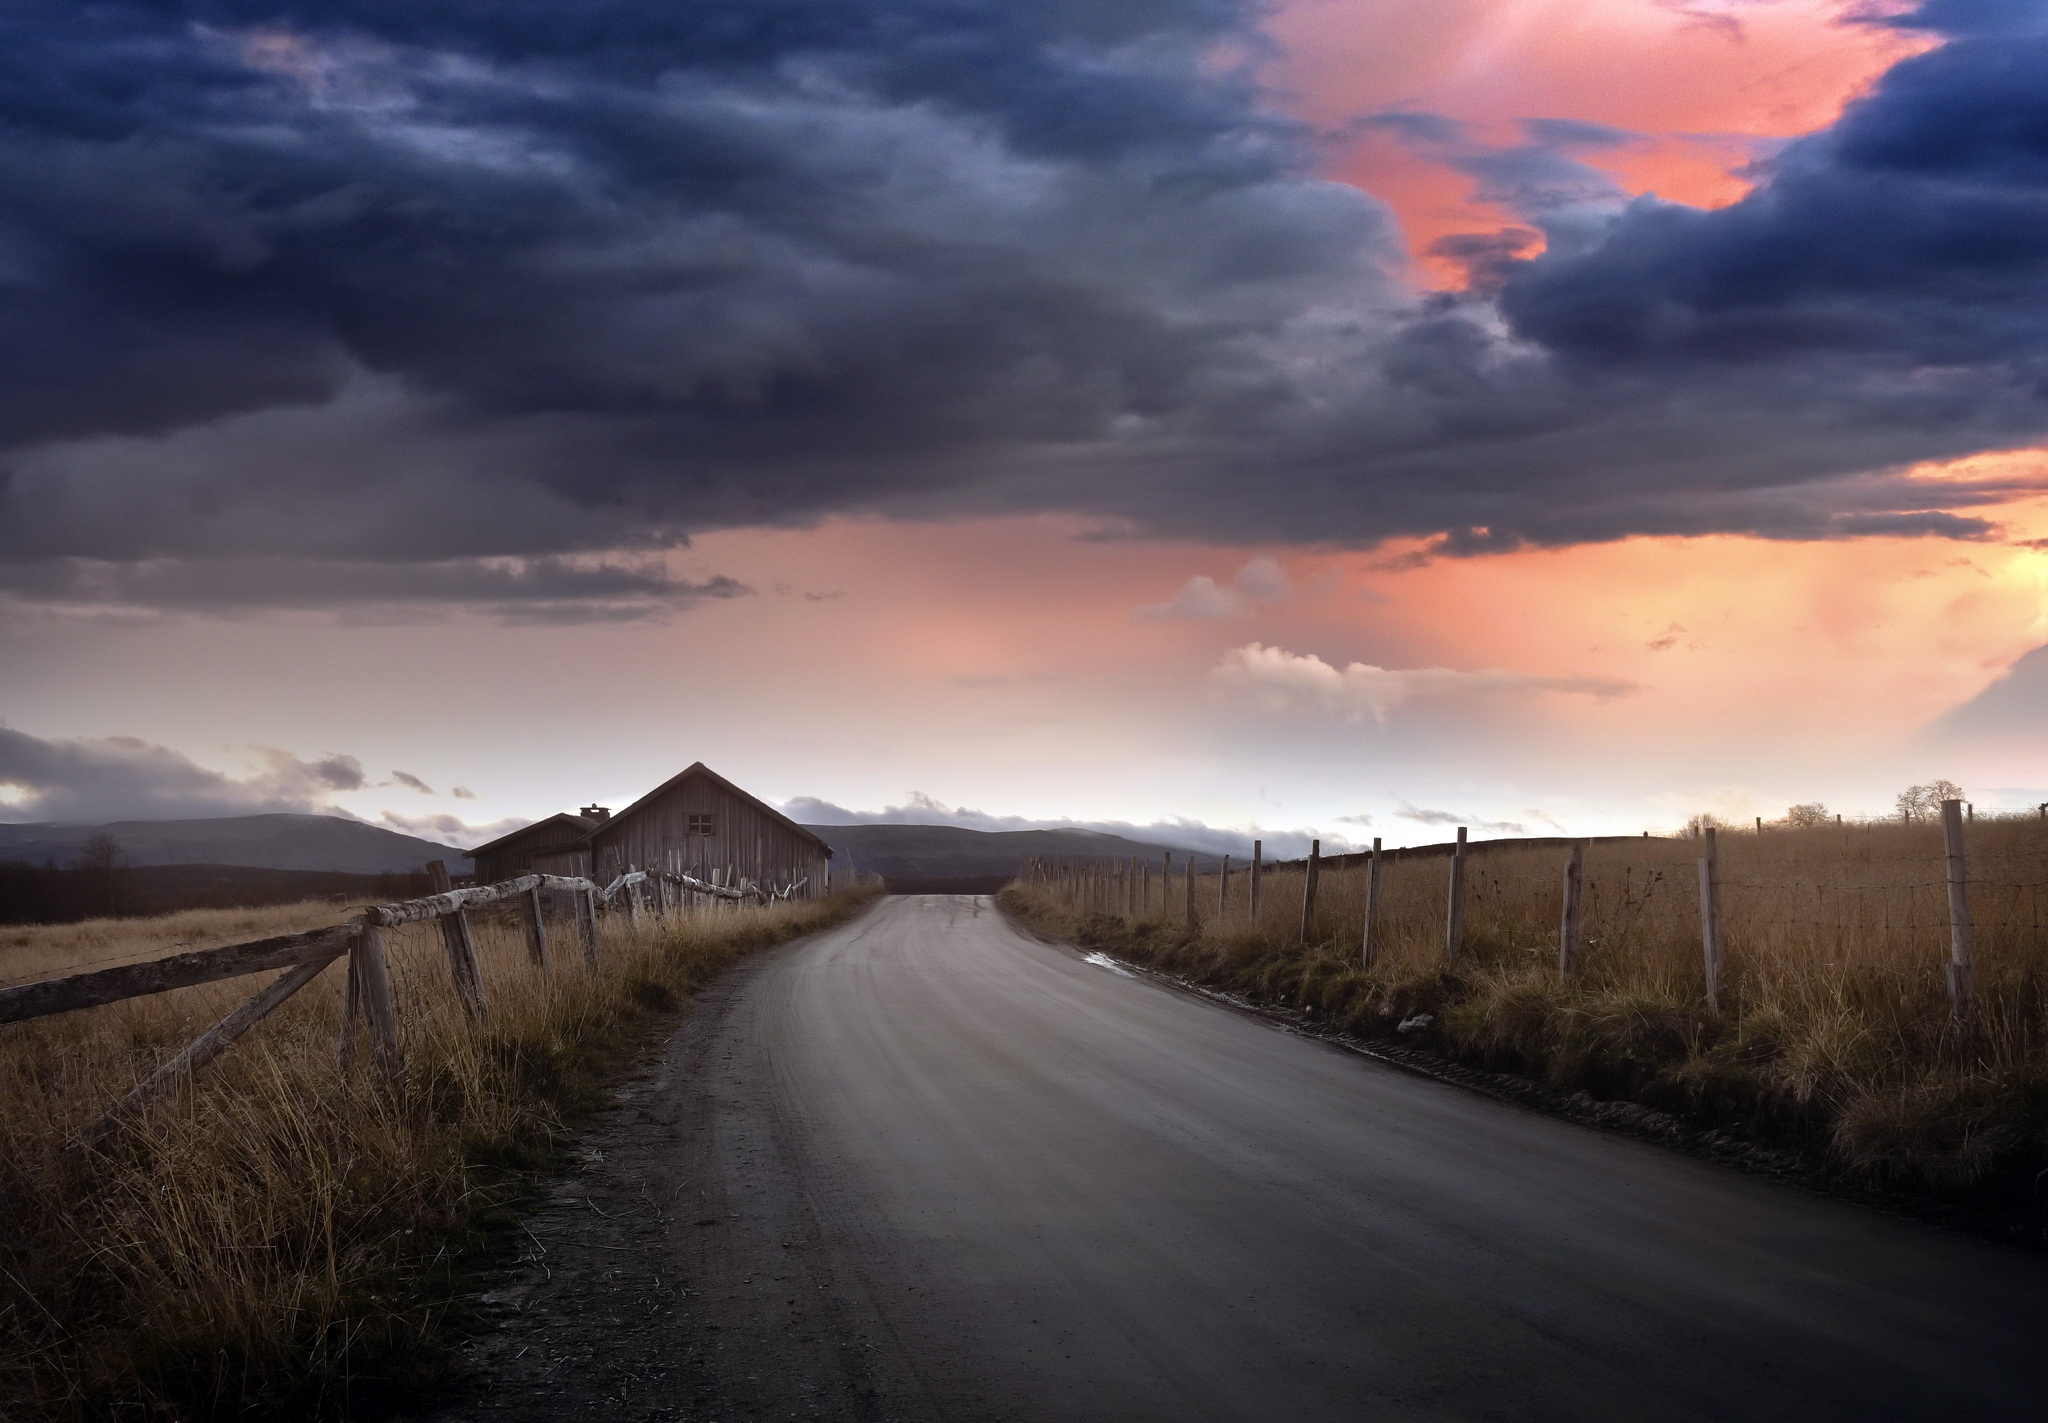 General 2048x1423 road sky clouds outdoors dirt road fence landscape barns overcast